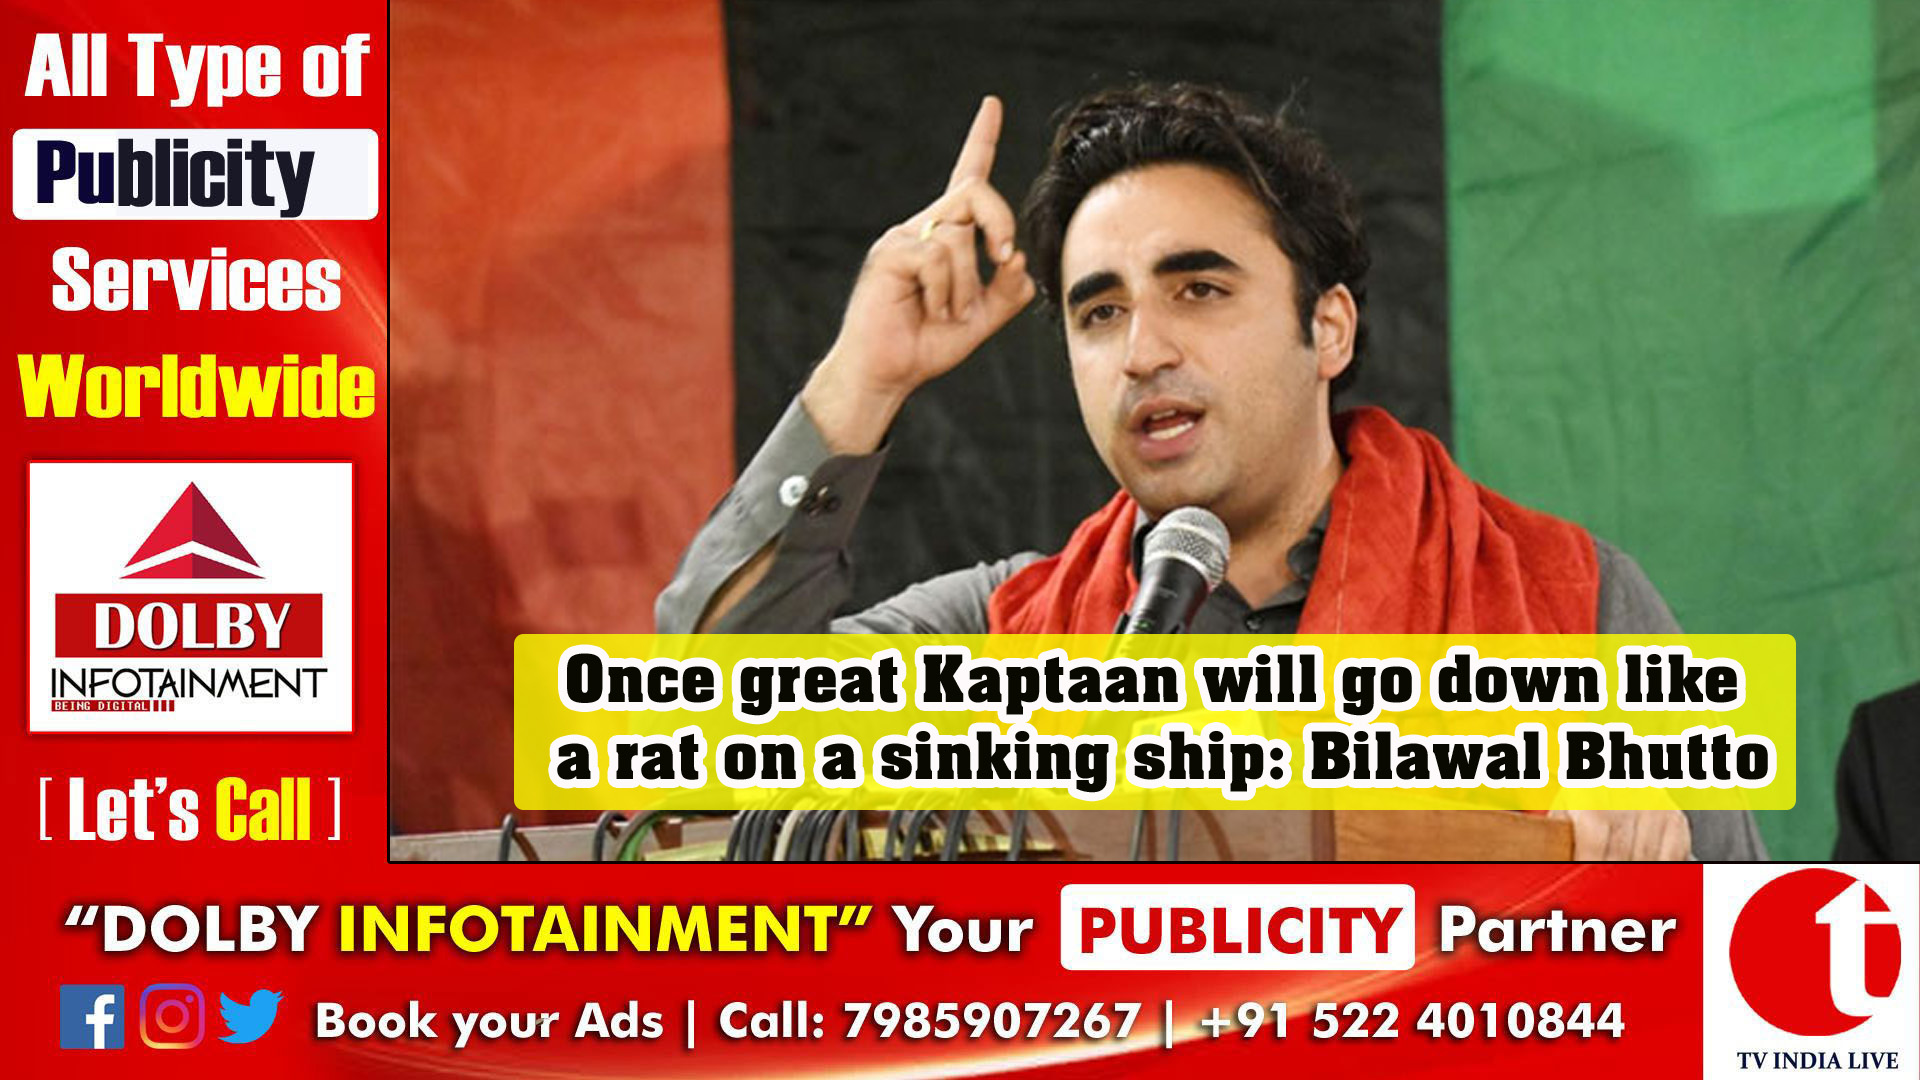 Once great Kaptaan will go down like a rat on a sinking ship: Bilawal Bhutto